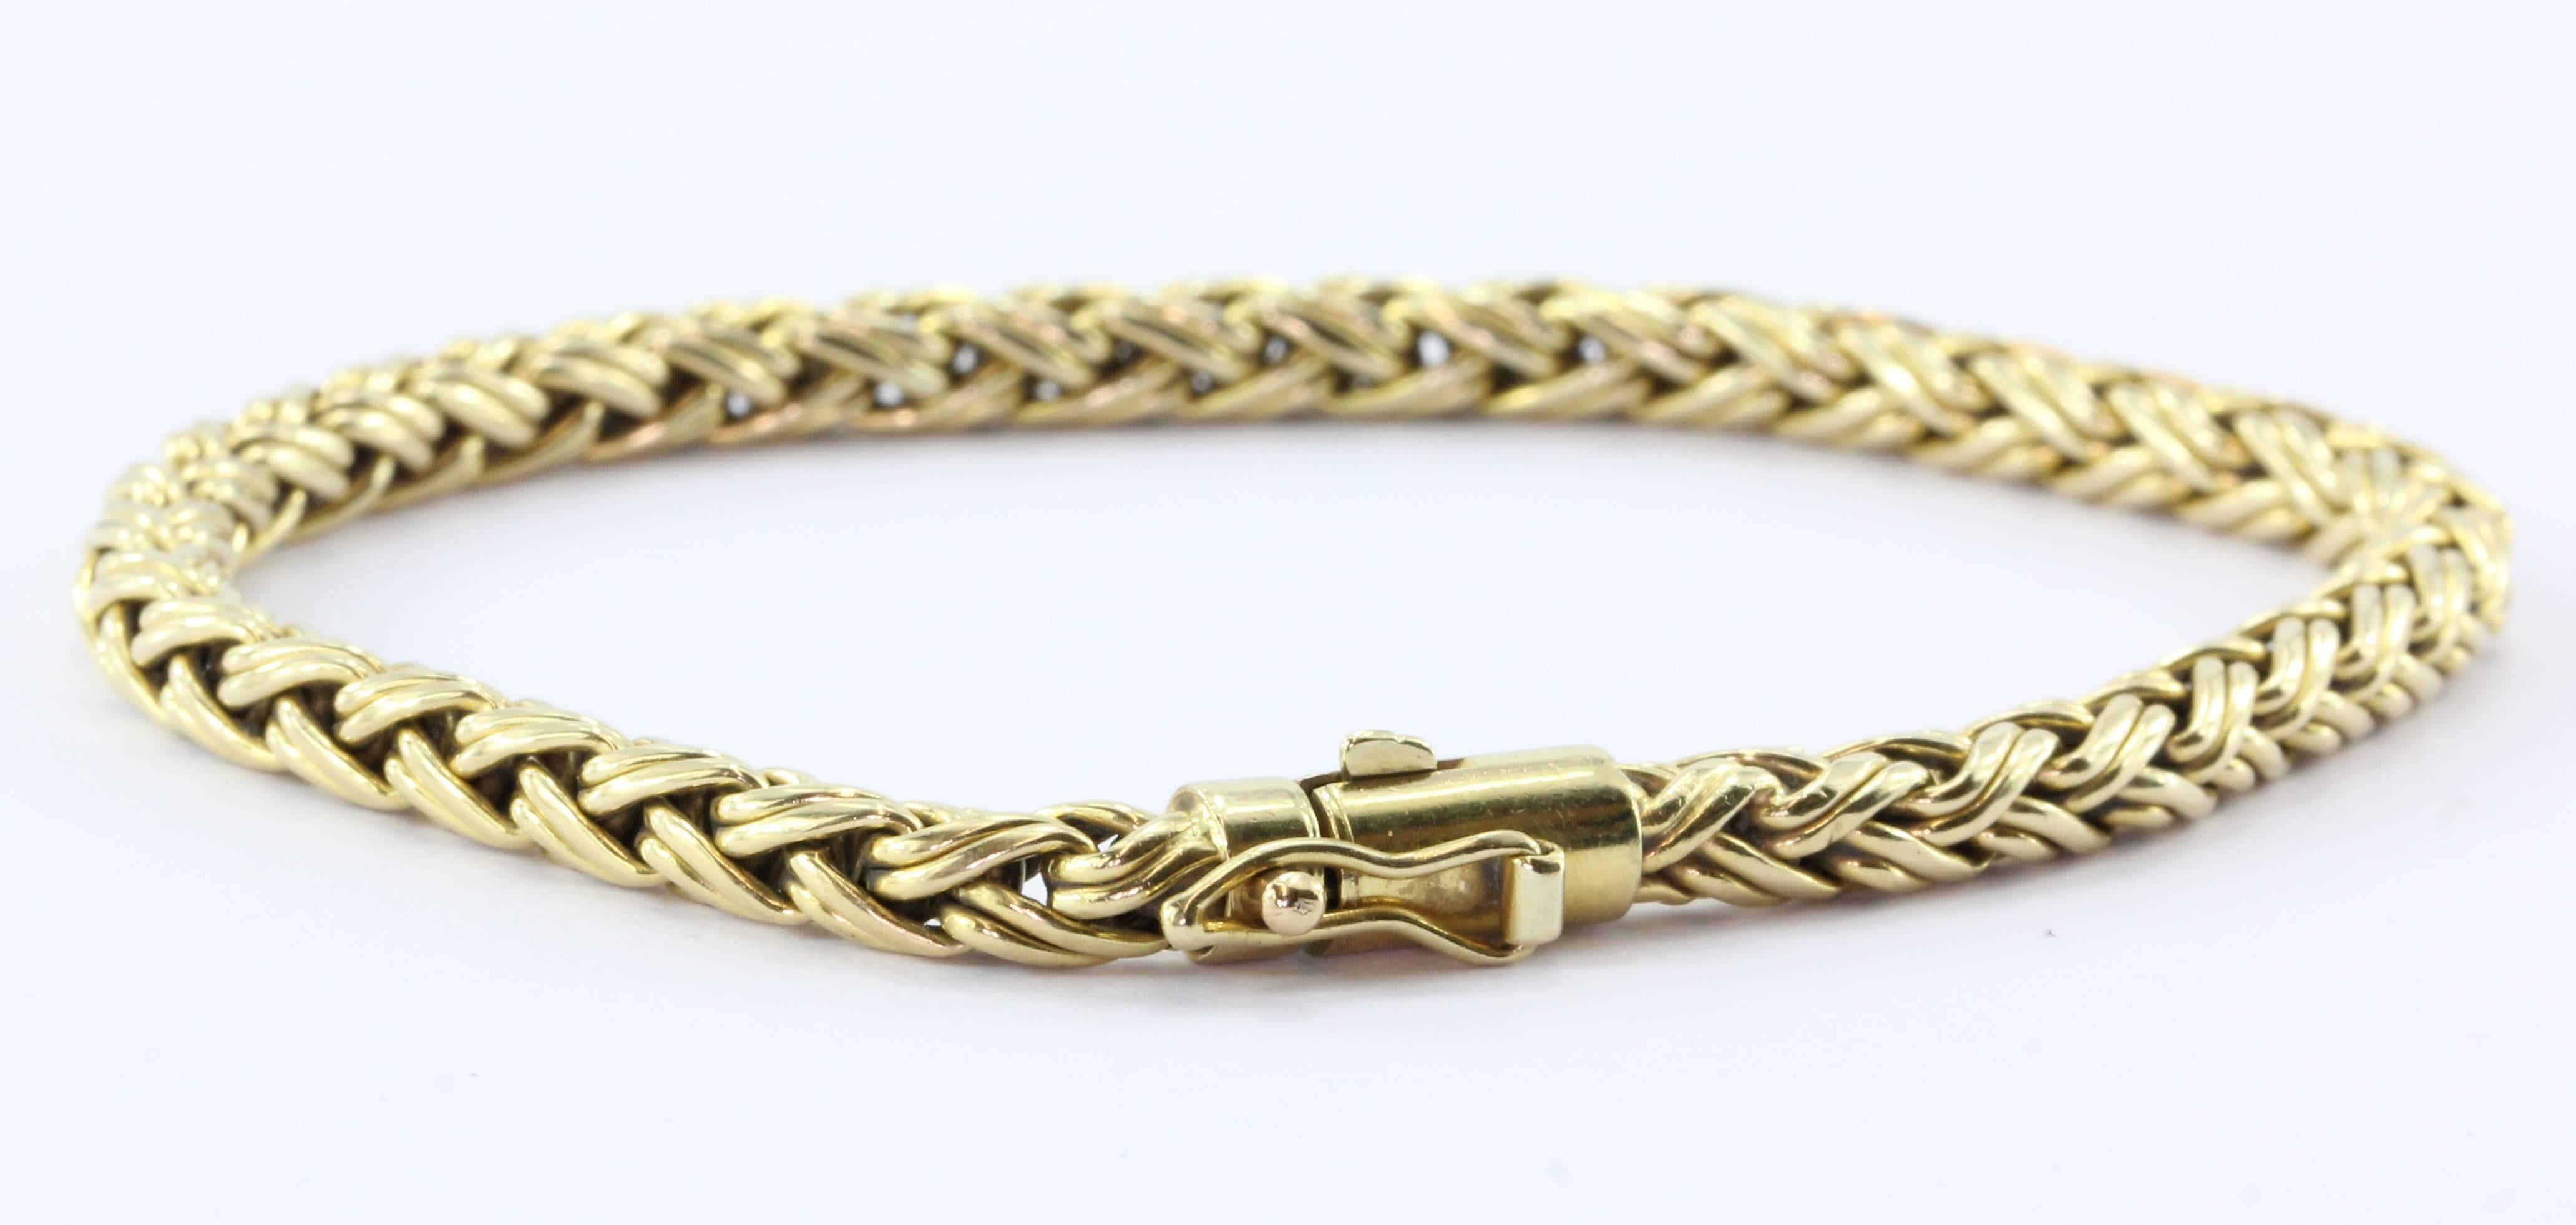 Tiffany & Co 18K Gold Woven Braided Bracelet 7.4". The bracelet is in excellent estate condition and ready to wear. It comes with a pouch and box. The piece is signed "Tiffany & Co 750". It measures about 7.4" long x